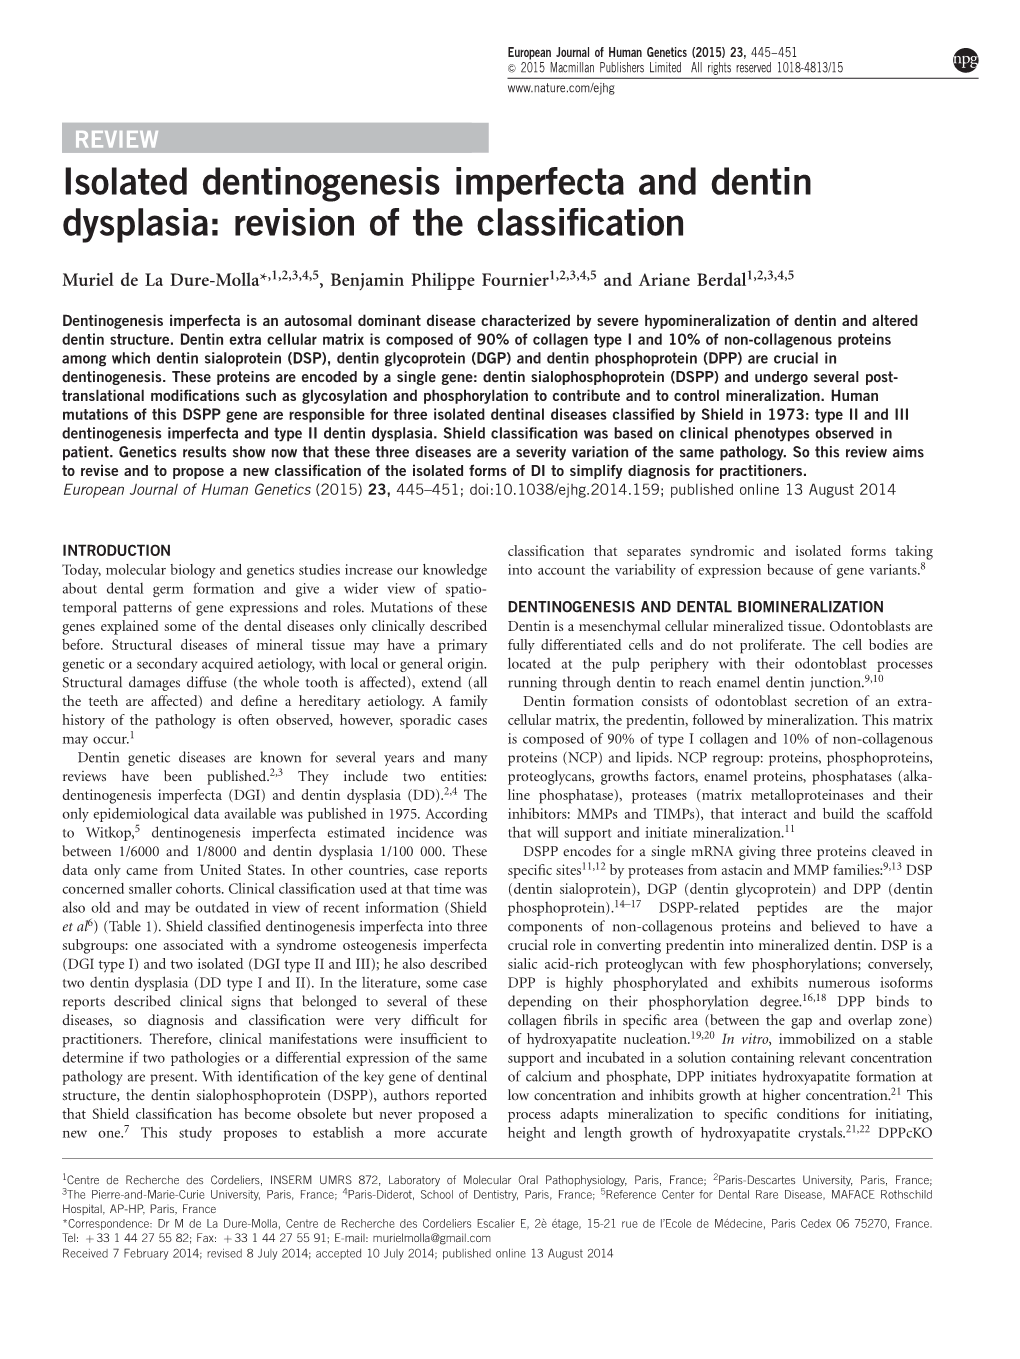 Isolated Dentinogenesis Imperfecta and Dentin Dysplasia: Revision of the Classiﬁcation